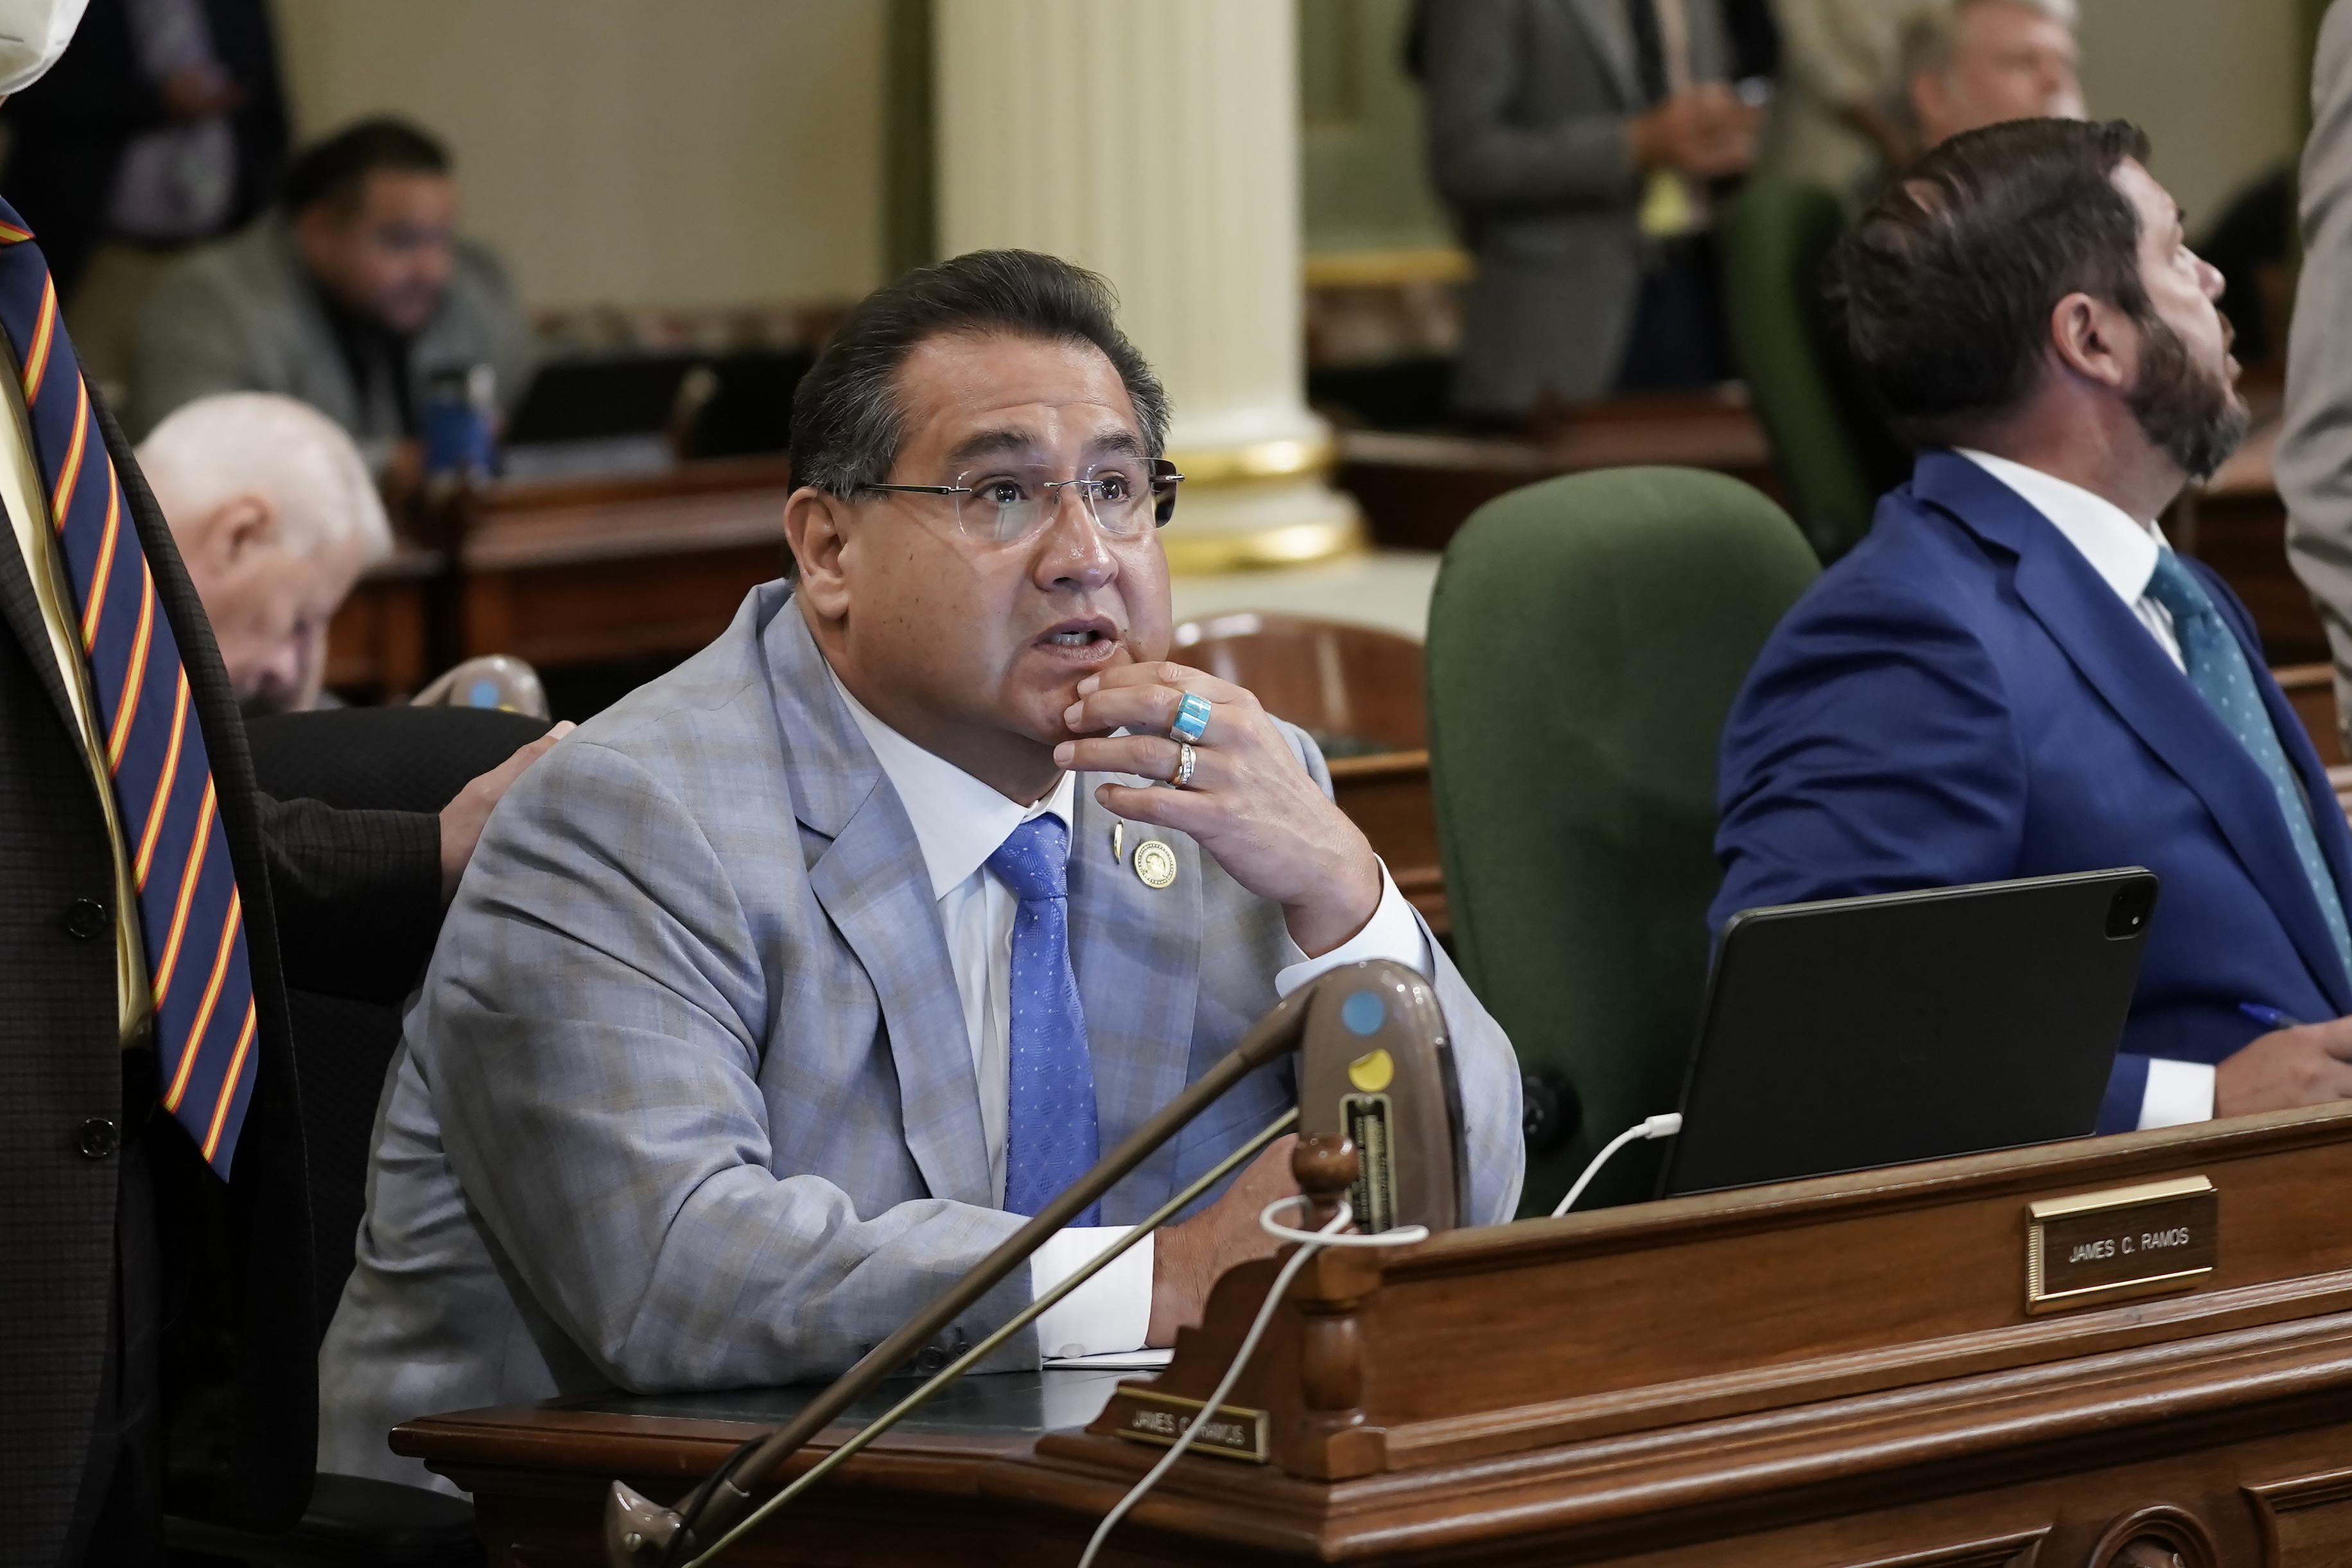 California lawmaker aims to ban lead fishing weights